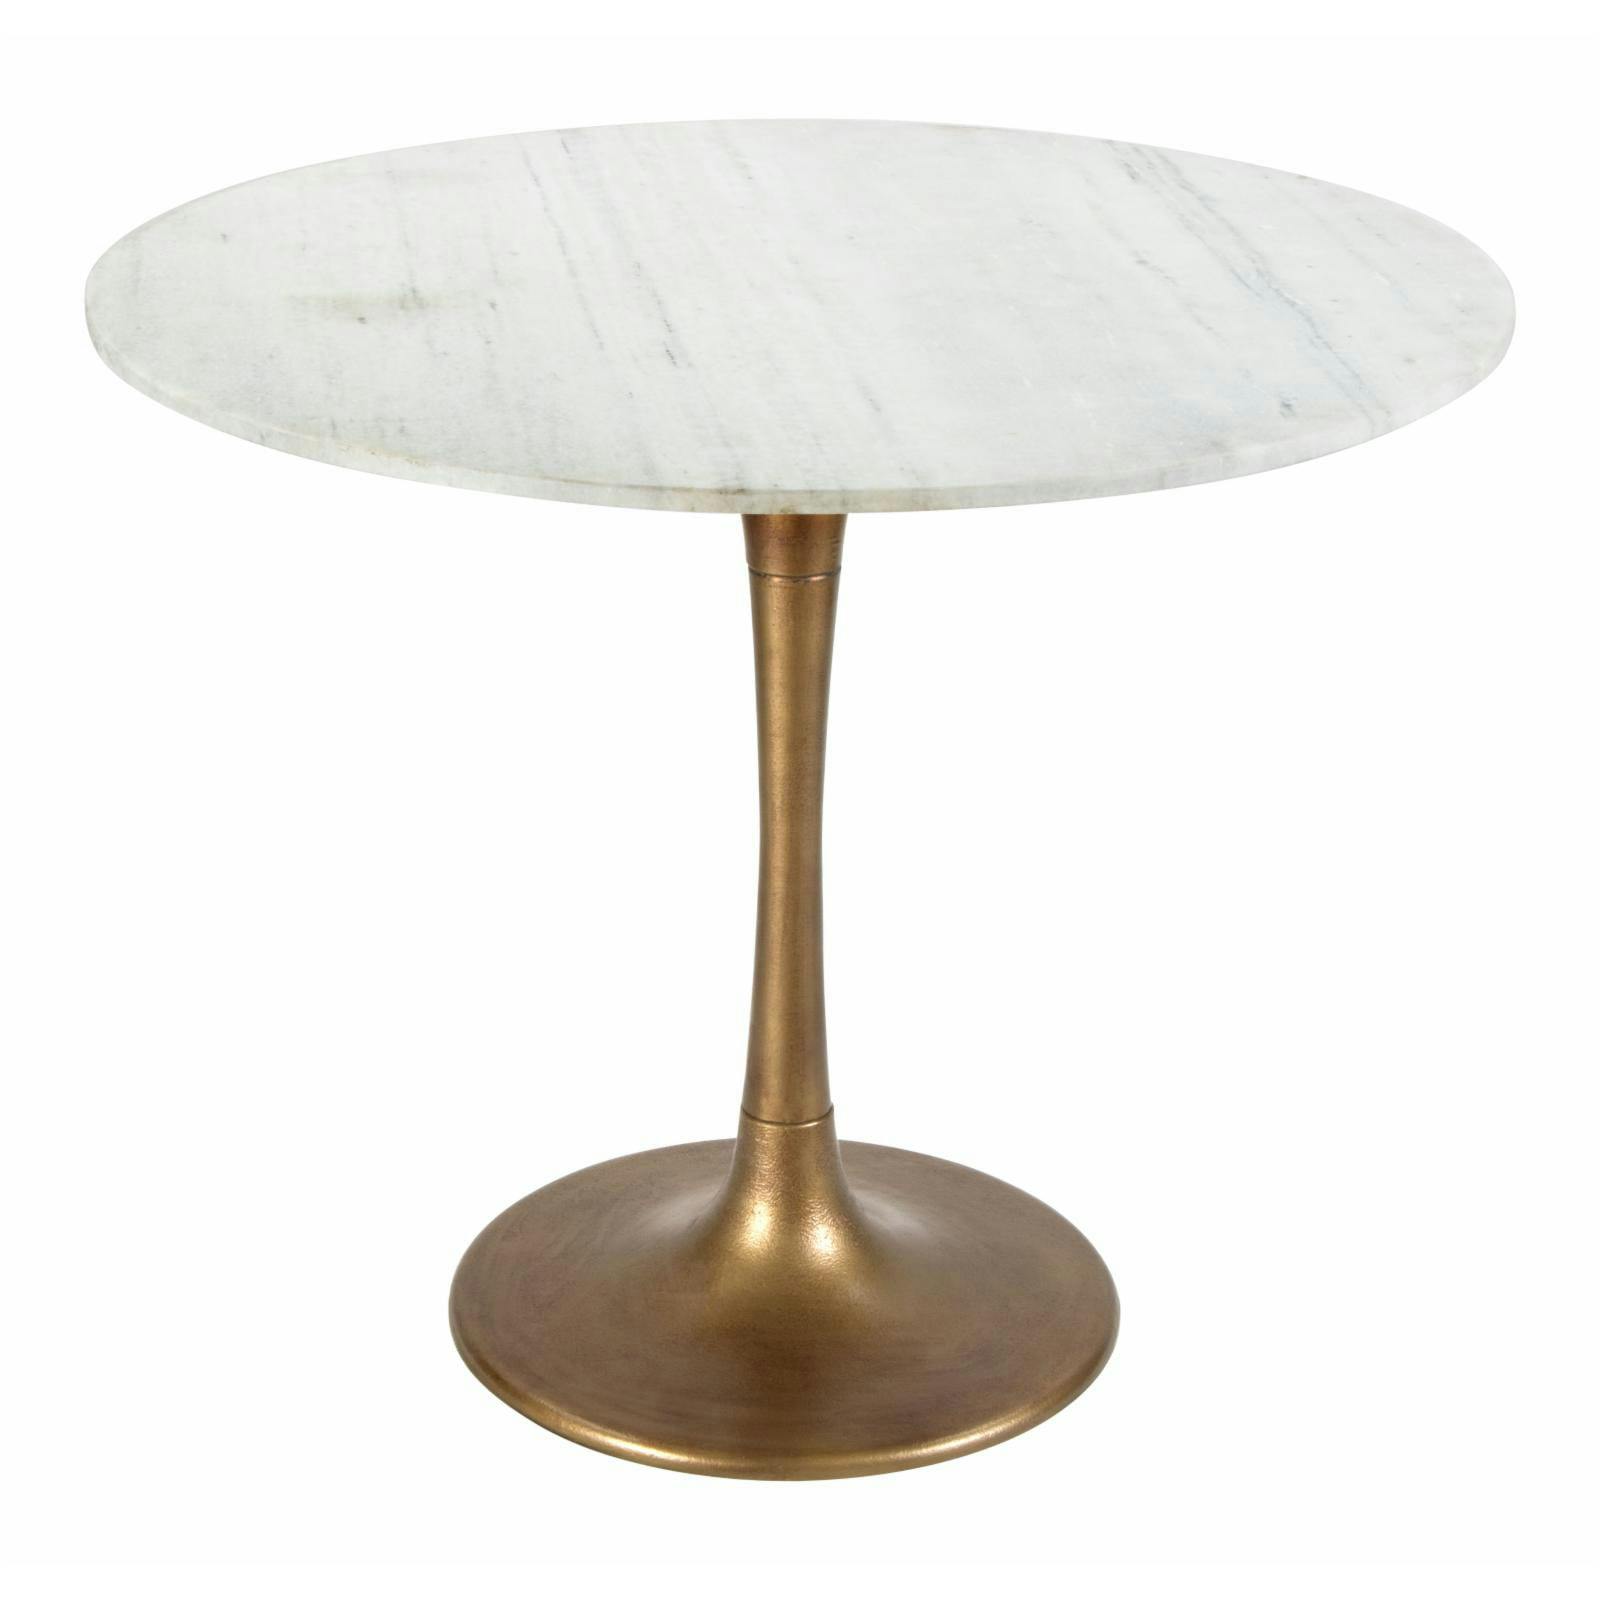 Fullerton 36" Round White Marble & Gold Mid-century Modern Dining Table